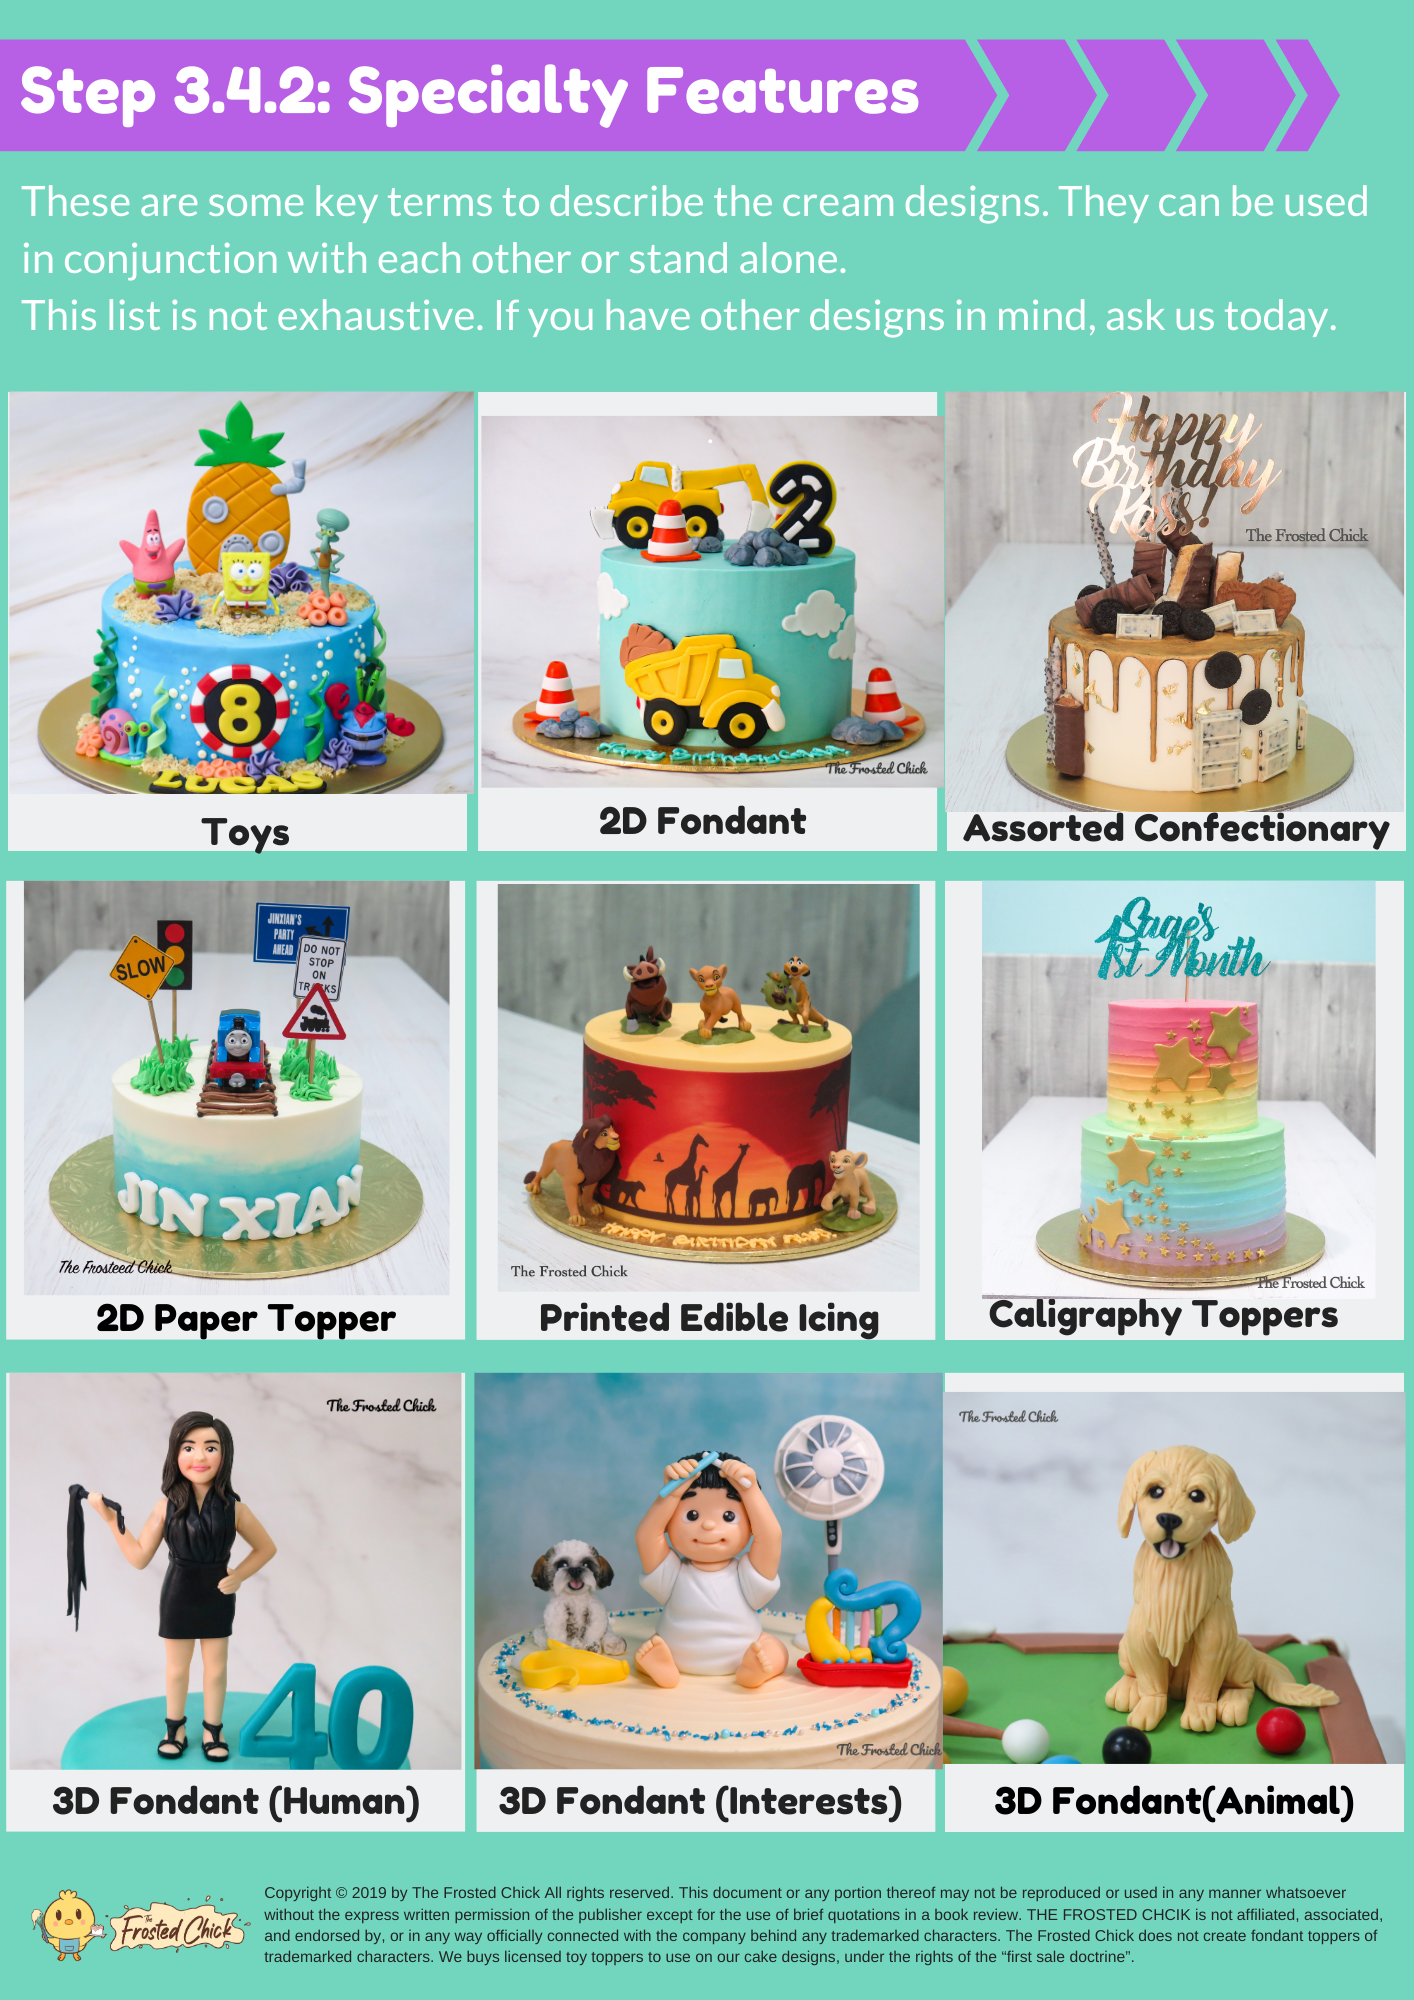 customised cake features